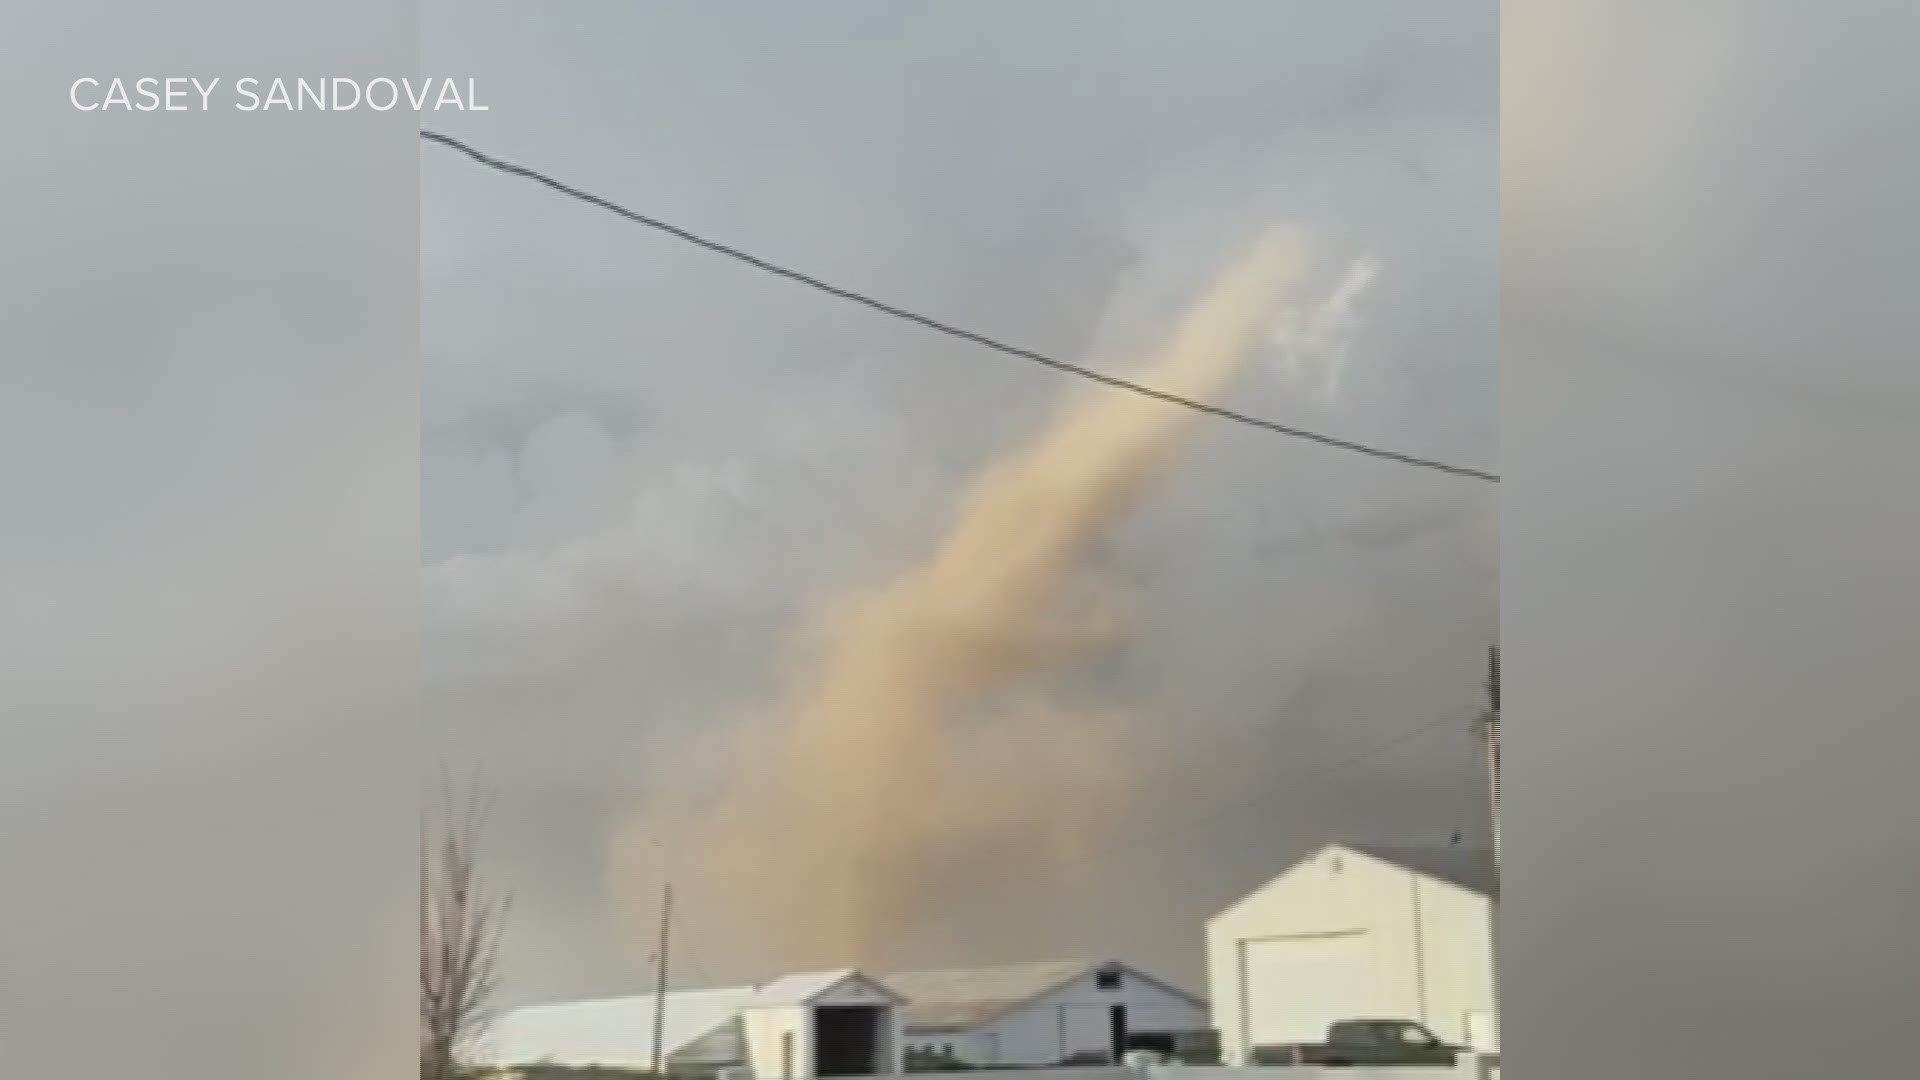 A weak landspout tornado touched down outside of Greeley on Wednesday evening, according to the National Weather Service (NWS) in Boulder.